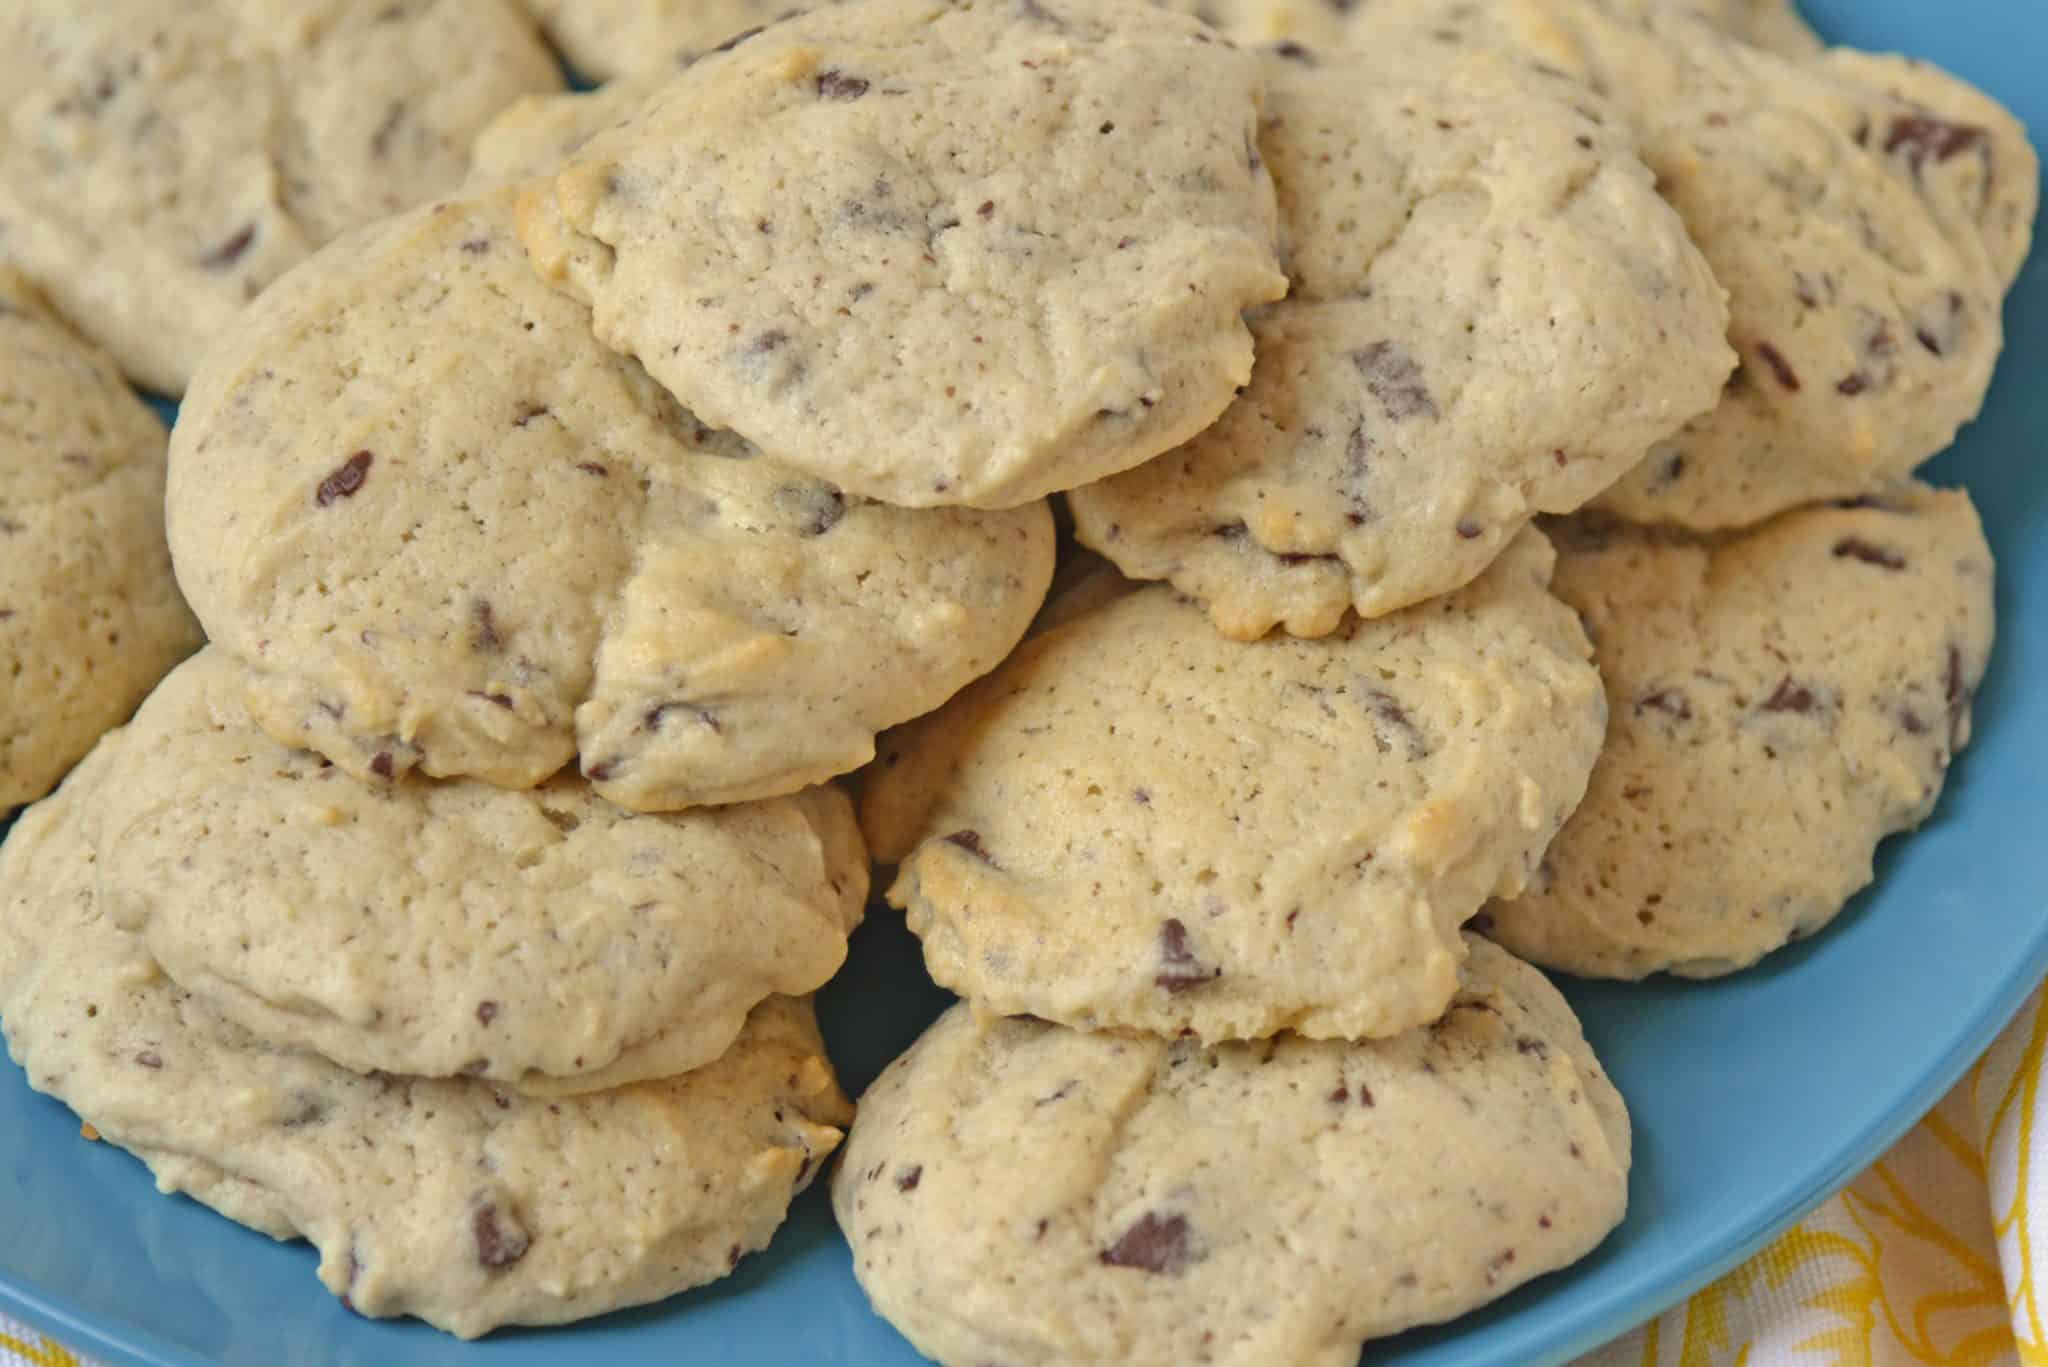 Cream Cheese Chocolate Chunk Cookies are a soft chocolate chip cookie recipe using rich cream cheese and rustic chunky chocolate.. #chocolatechipcookies #bestcookierecipe #softchocolatechipcookies www.savoryexperiments.com